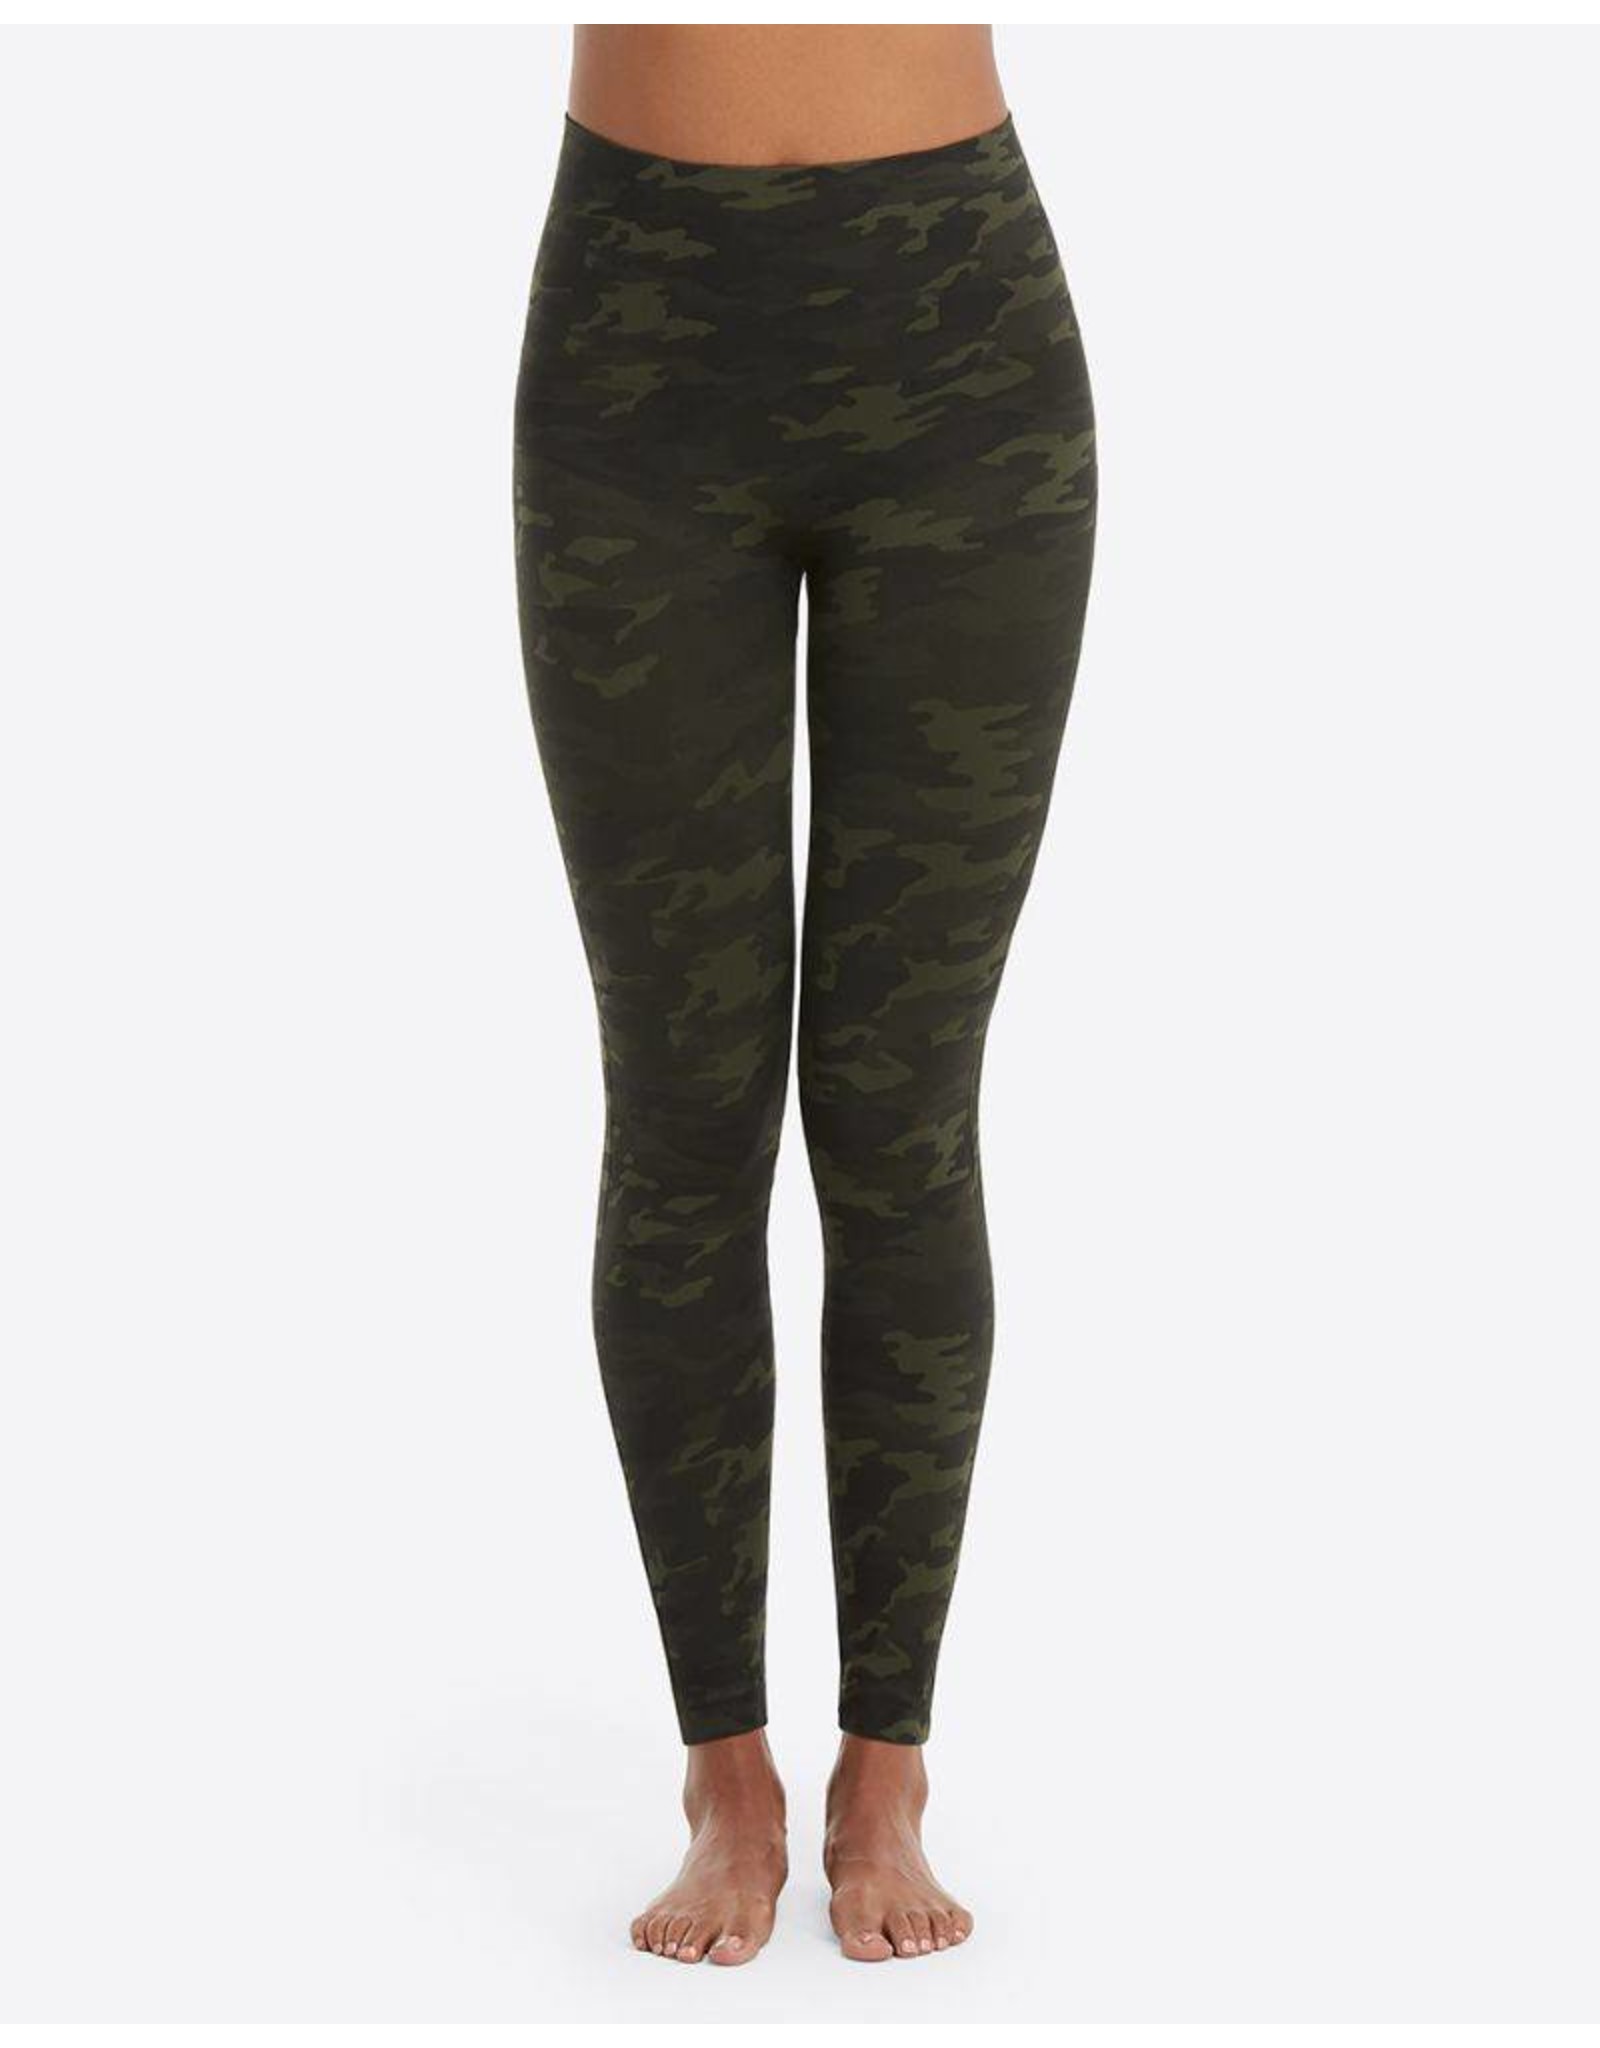 Spanx Look At Me Now Leggings Green Camo